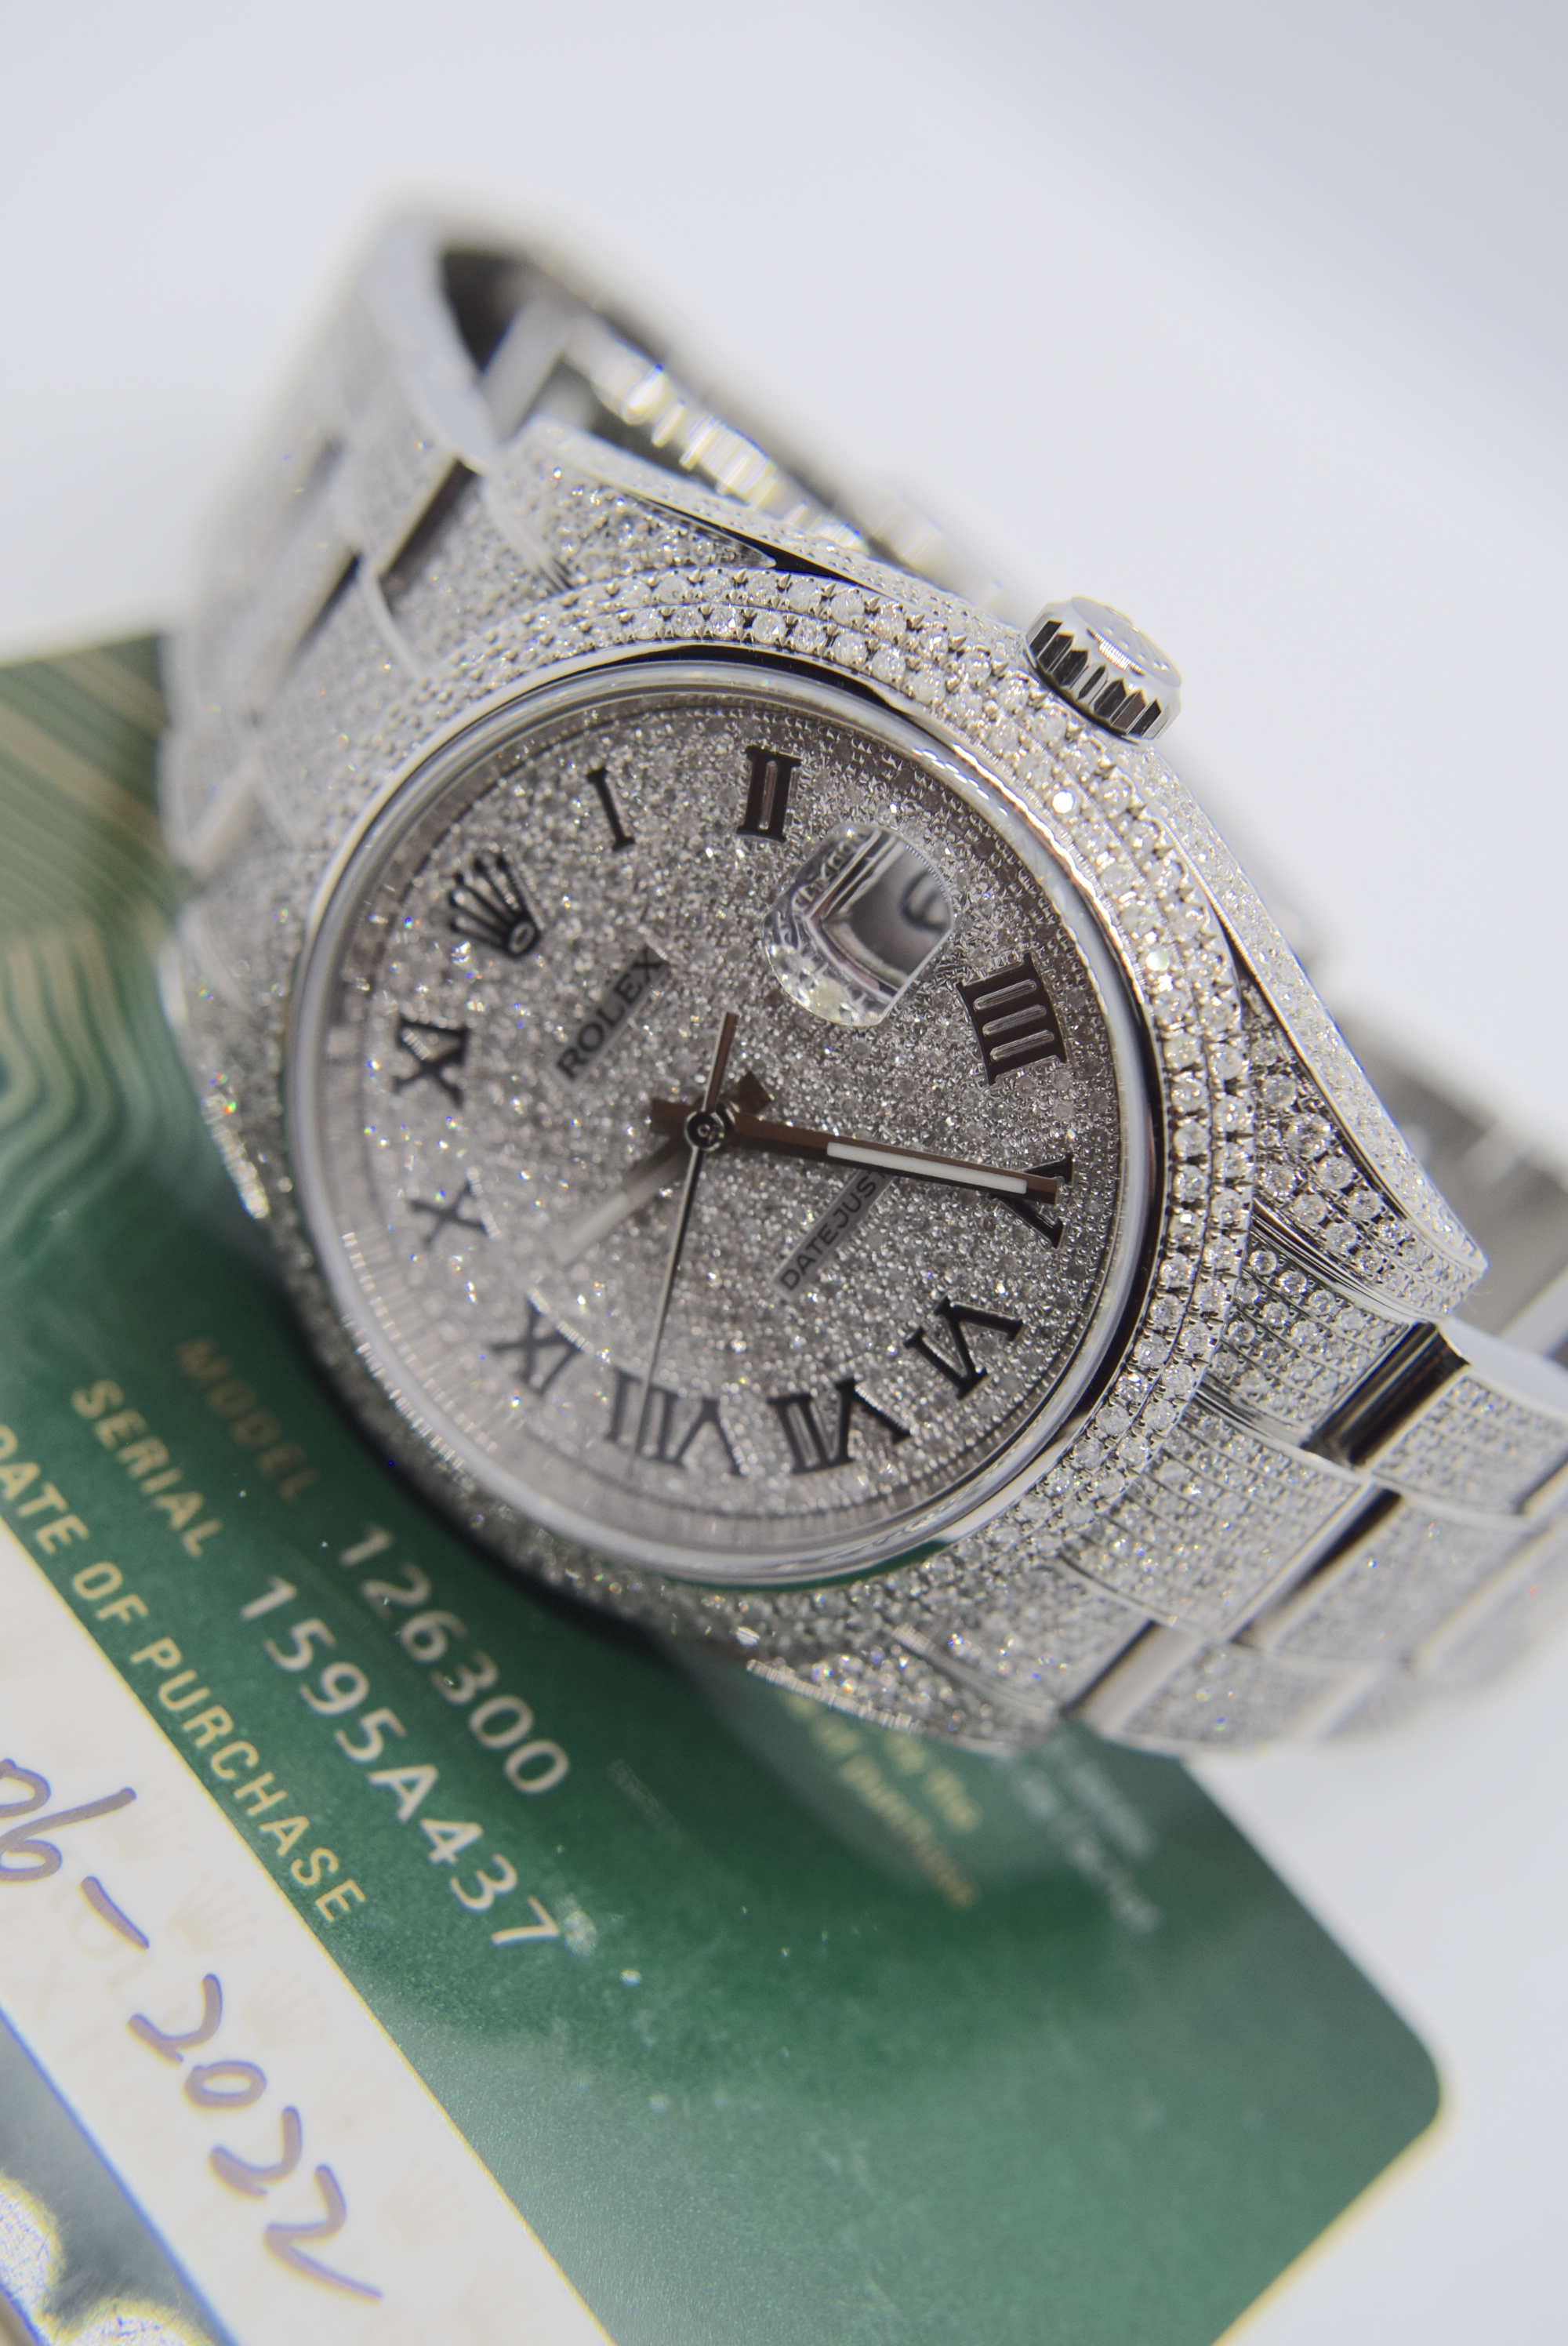 2022 ROLEX DATEJUST 41 REF. 126300 (FULLY DIAMOND-SET) WITH CERTIFICATE CARD - STAINLESS STEEL 41MM - Image 3 of 8